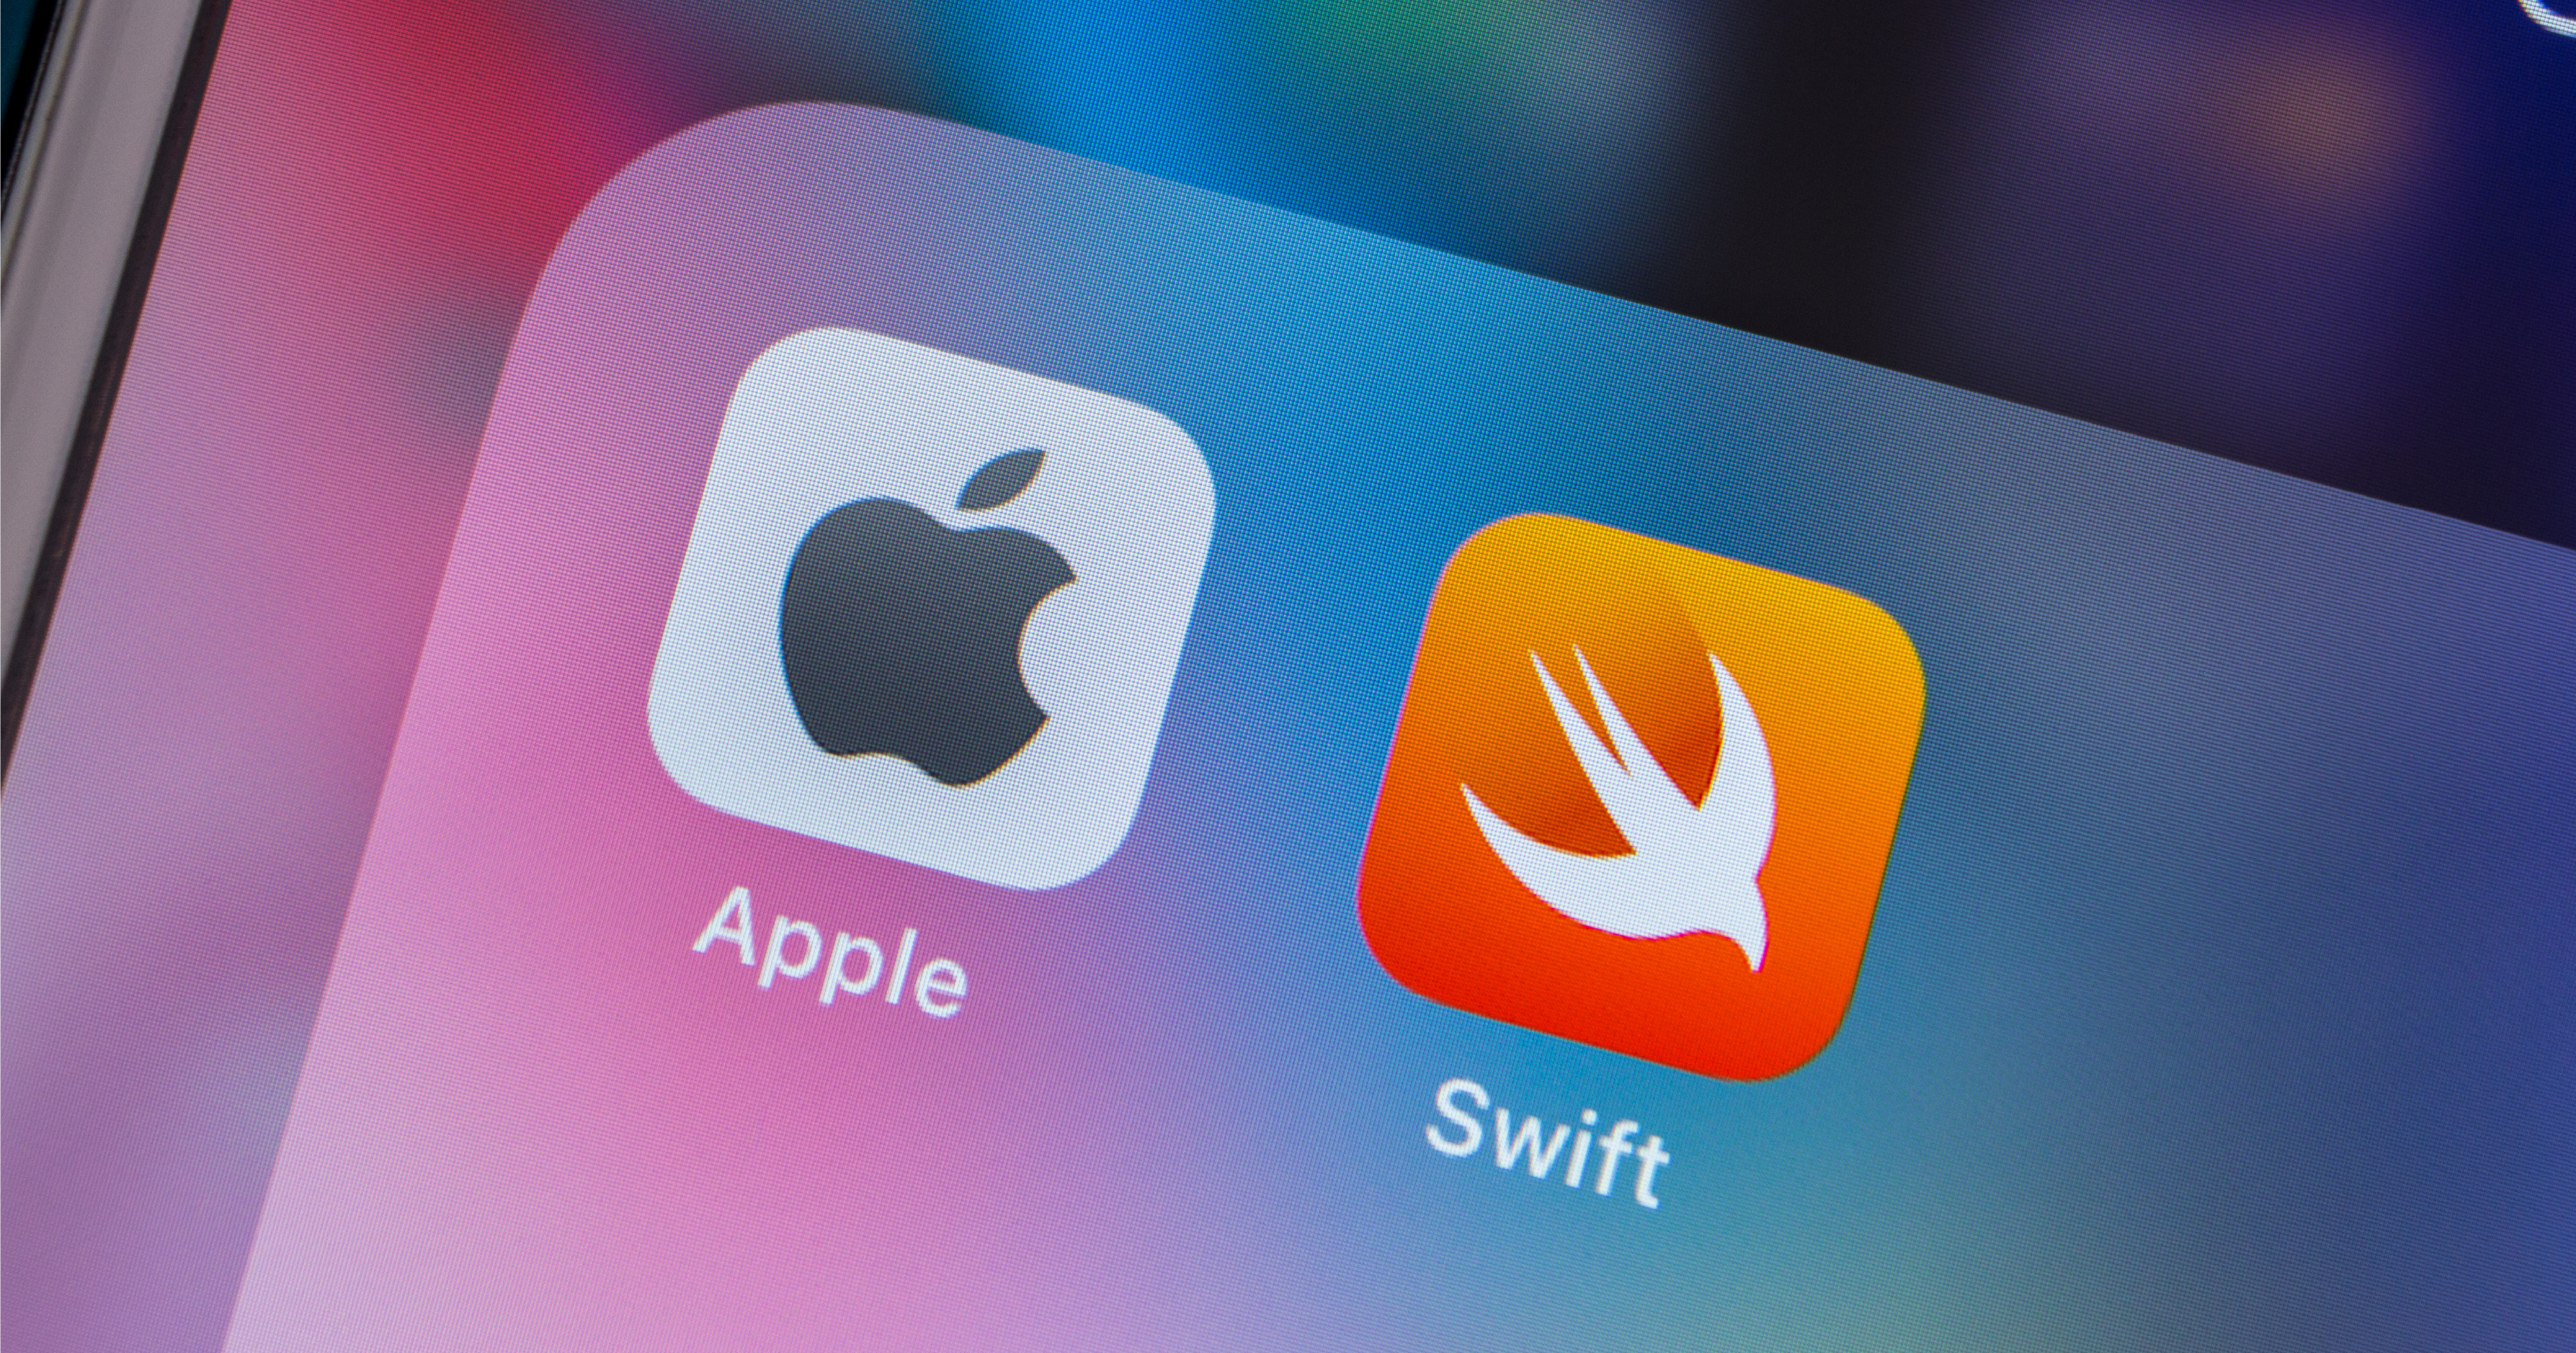 All About Swift